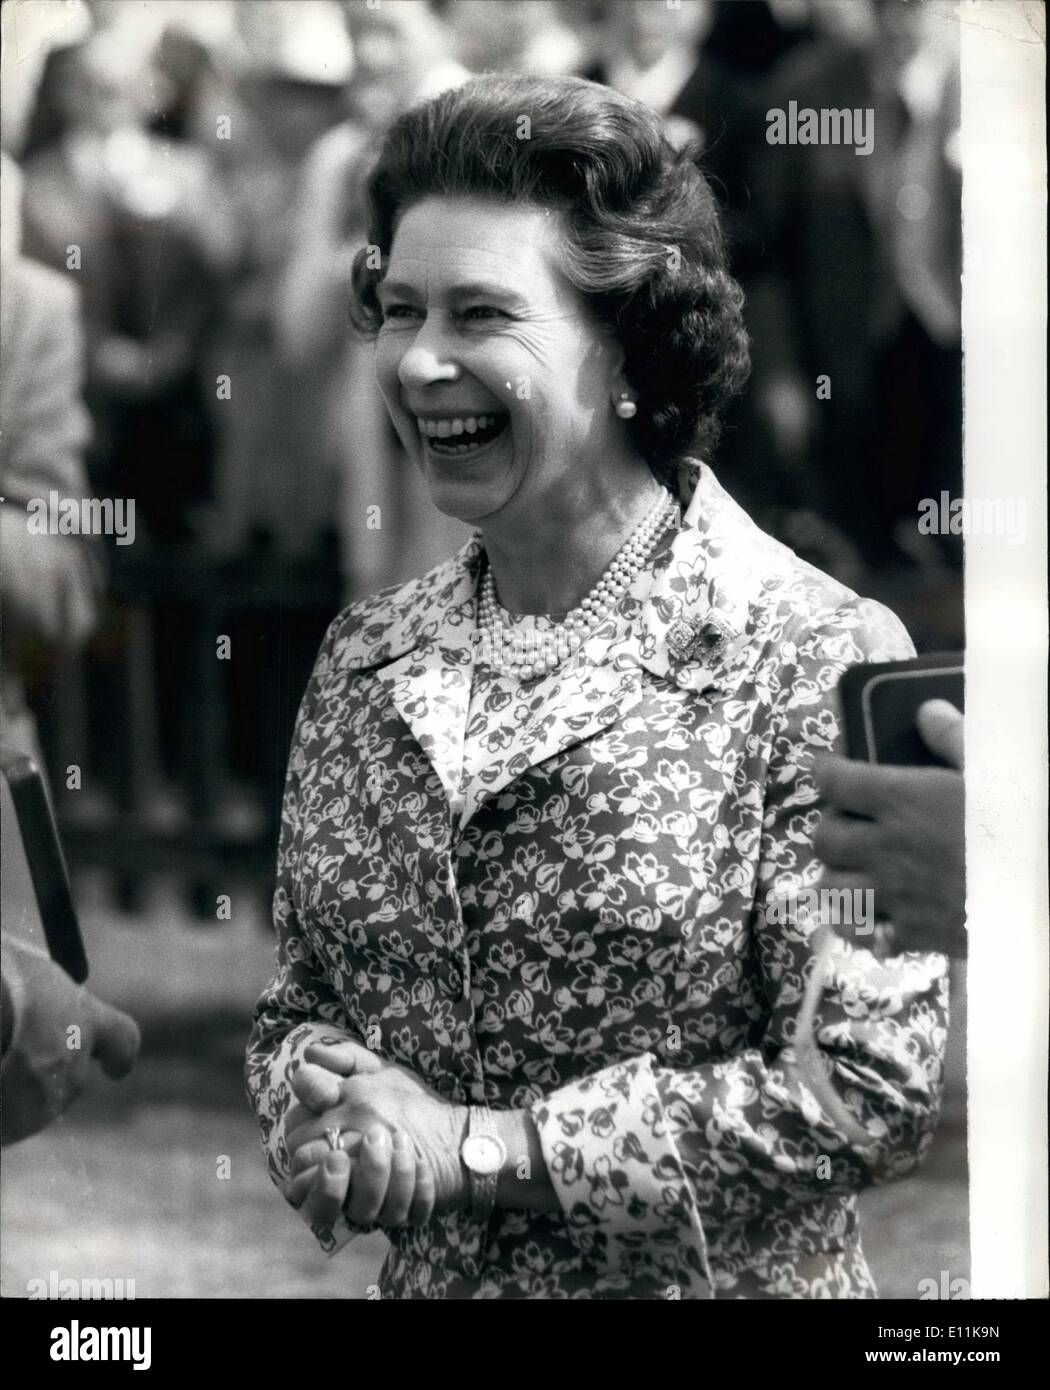 Jun. 06, 1978 - The Queen Watches Polo on Smiths Lawn Windsor: The Queen with other member of the Royal Family attended the Rothmans International Polo match on Smiths Lawn, Windsor Great Park yesterday. Photo shows The Queen in a happy mood when she presented awards to the winner of the Queen's Cup Stowl Park at Windsor yesterday. Stock Photo